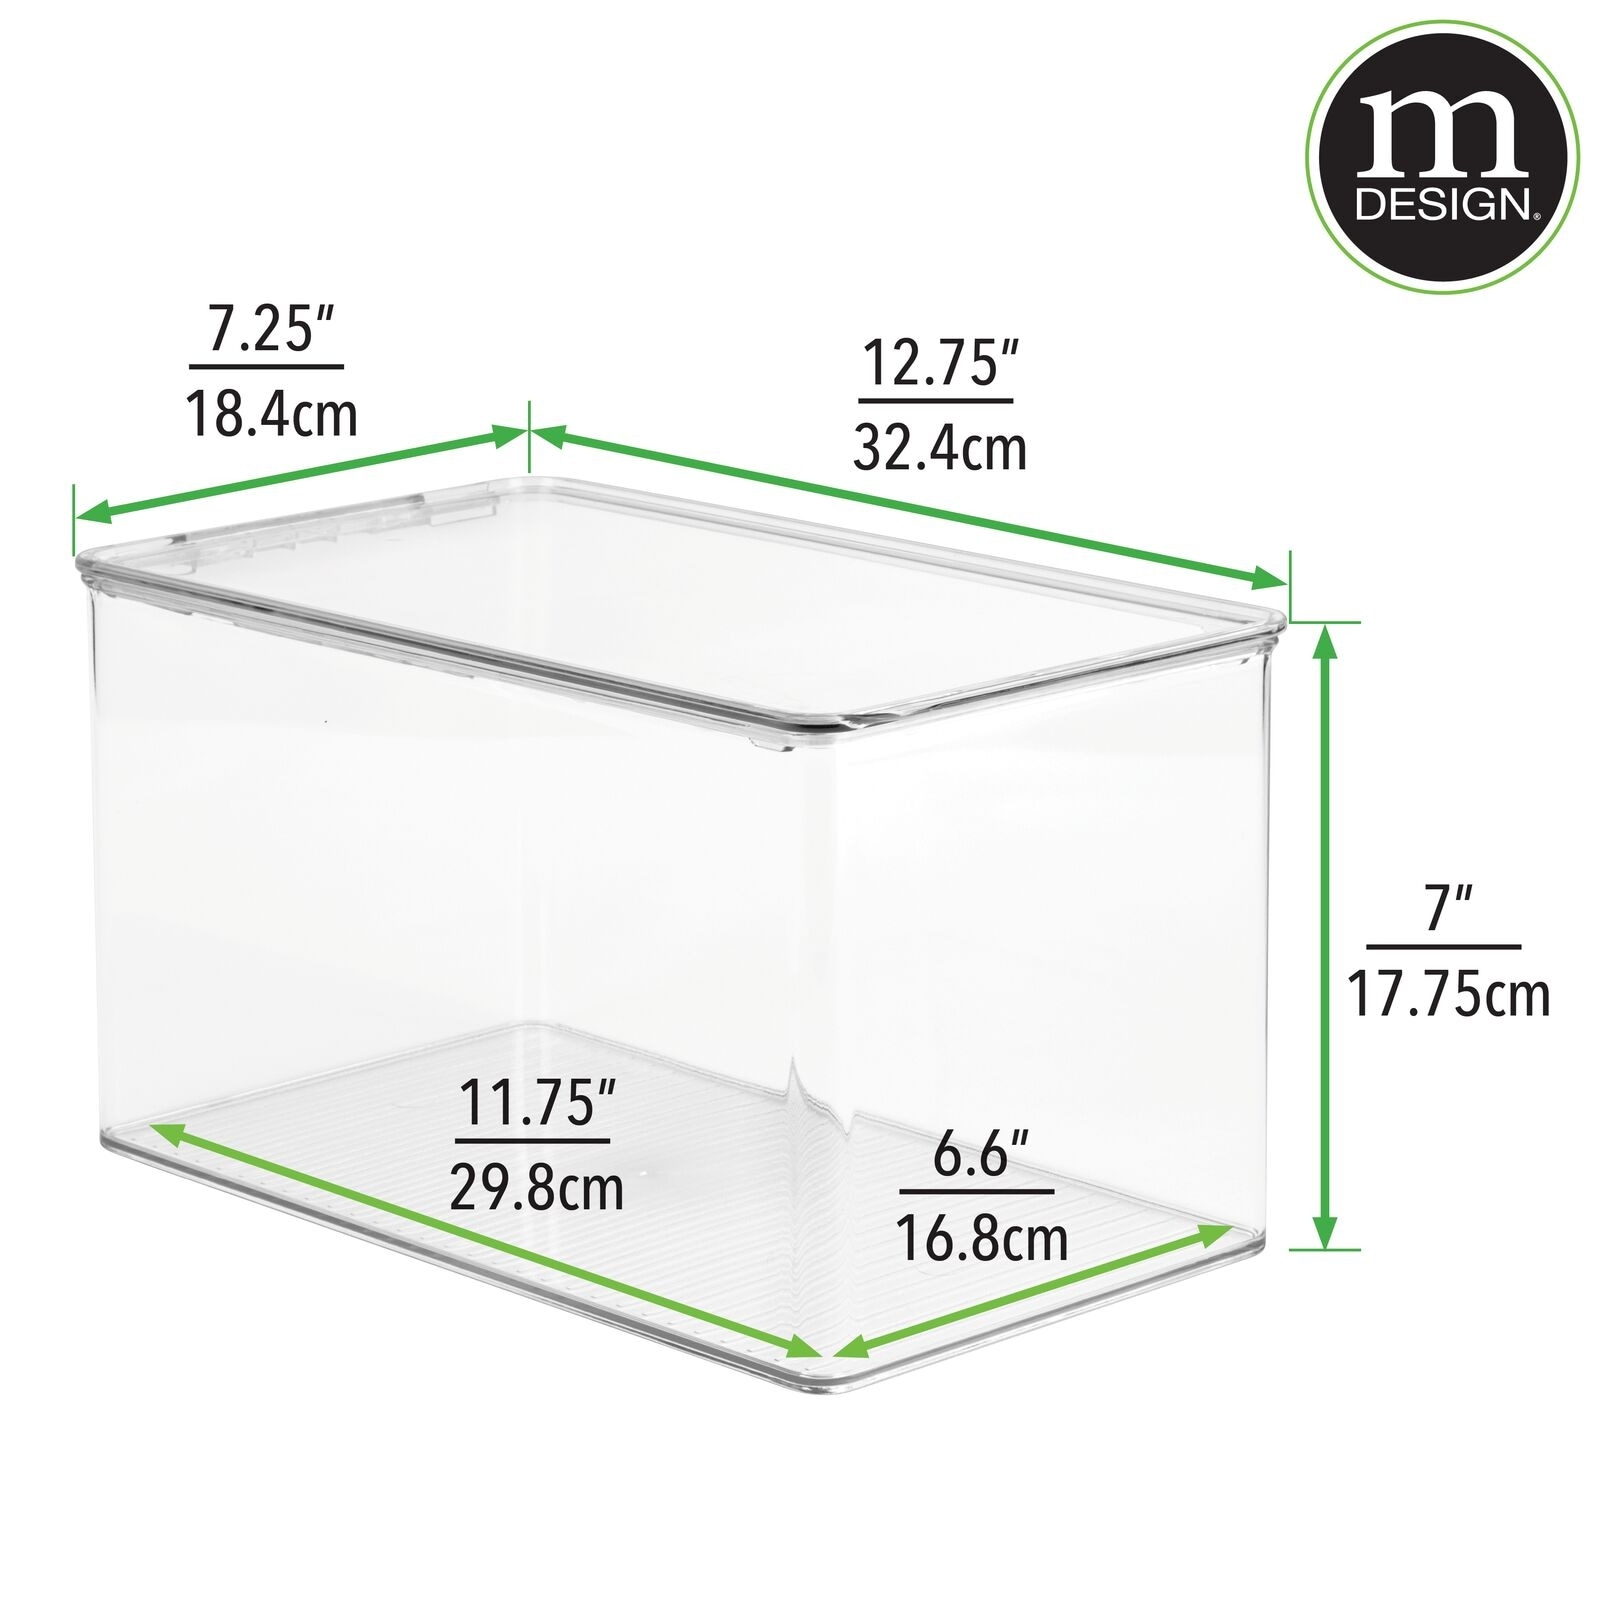 https://ak1.ostkcdn.com/images/products/is/images/direct/d61e877d1d09b35de9723a115fe38f484113ccee/mDesign-Plastic-Toy-Storage-Bin-with-Hinged-Lid-for-Kids-Playroom.jpg